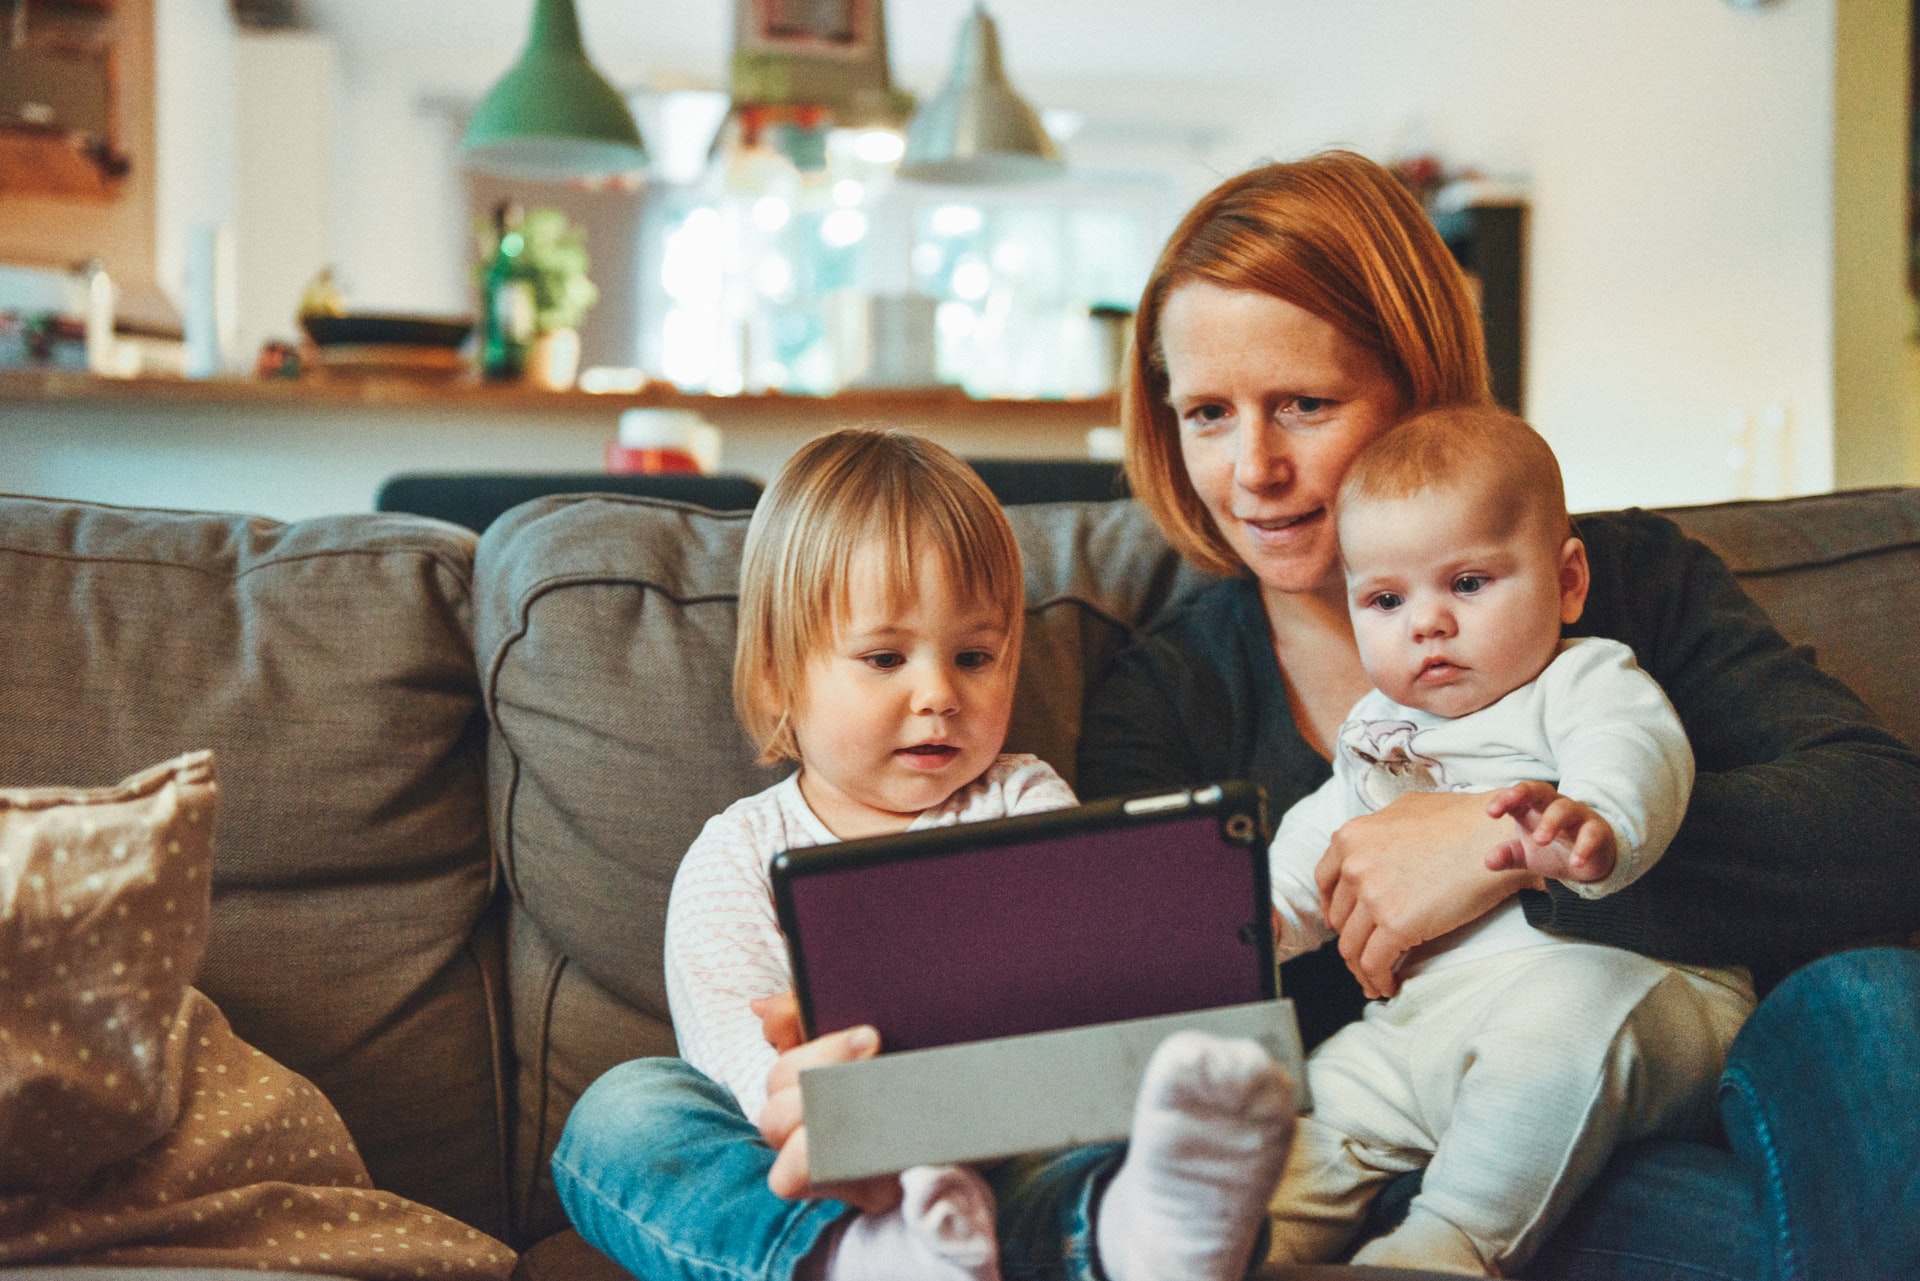 two-babies-and-mother-sitting-on-the-sofa-holding-one-baby-and-looking-at-a-tablet